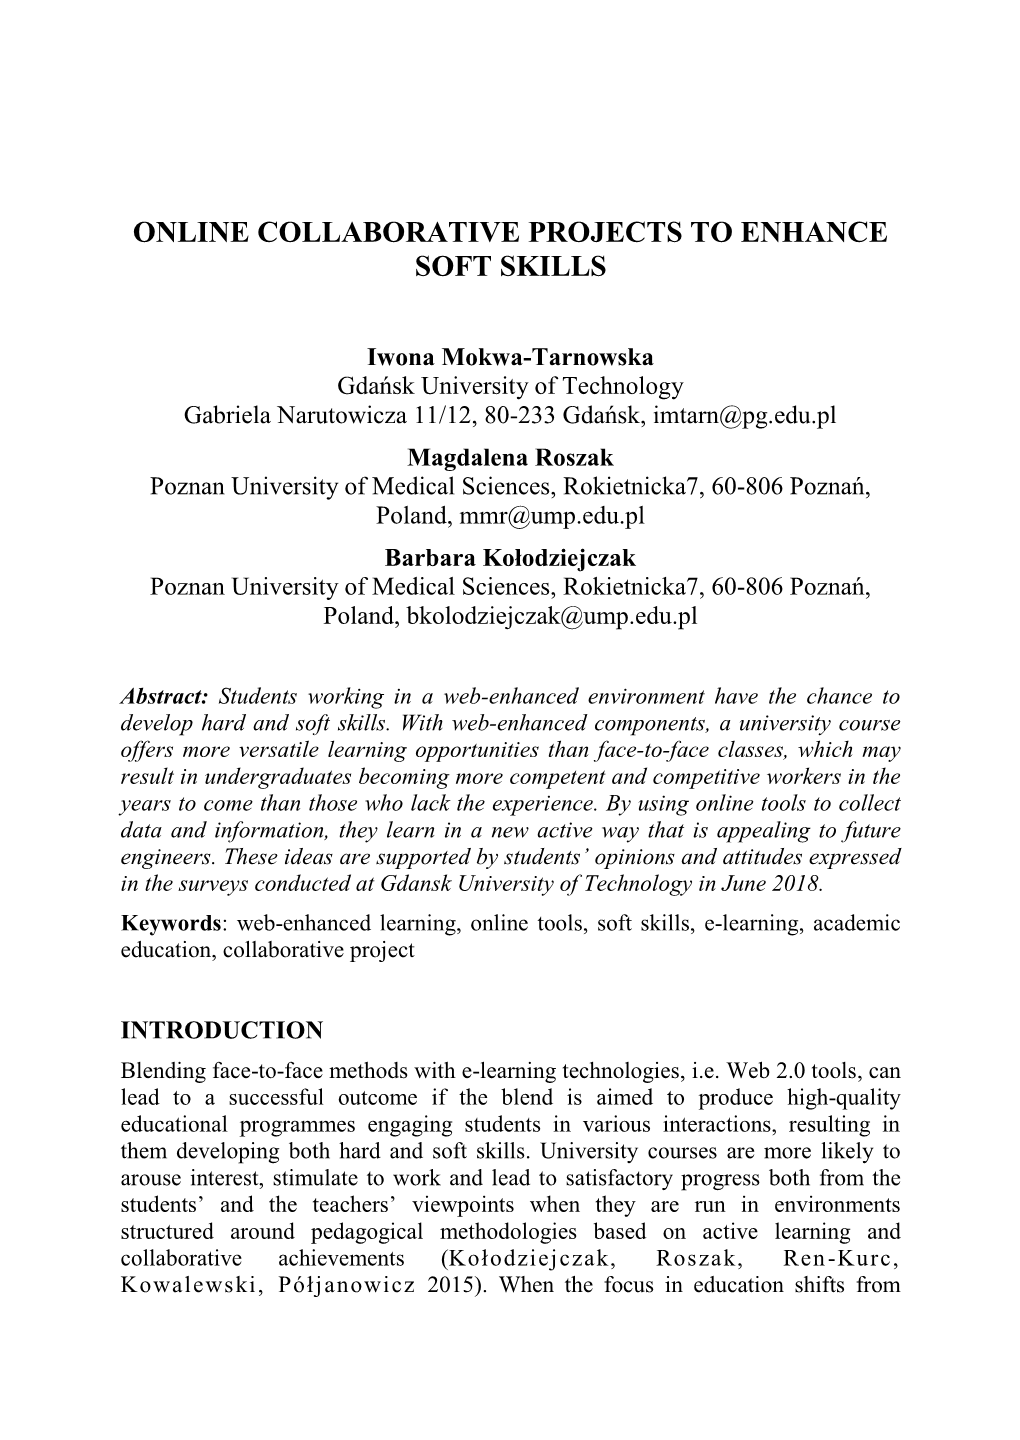 Online Collaborative Projects to Enhance Soft Skills